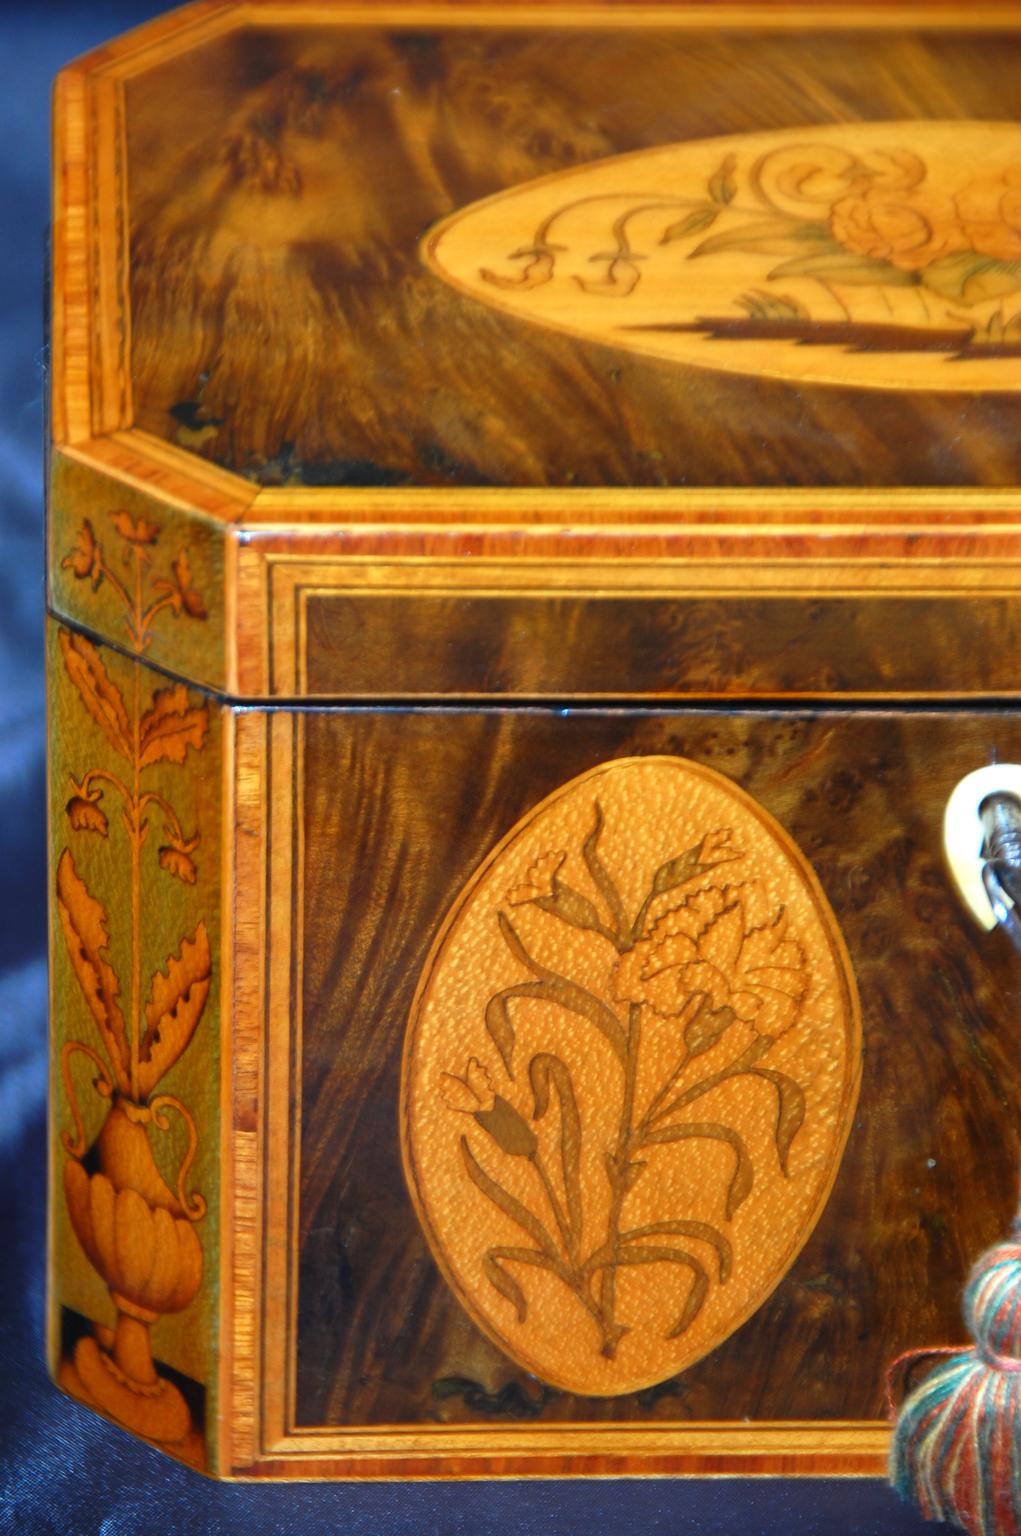 English Georgian harewood octagonal inlaid double tea caddy. The top and front of this fine tea caddy have satinwood ovals inlaid with various flowers in boxwood and sycamore. The front corners have elaborate boxwood inlay on sycamore ground of urns